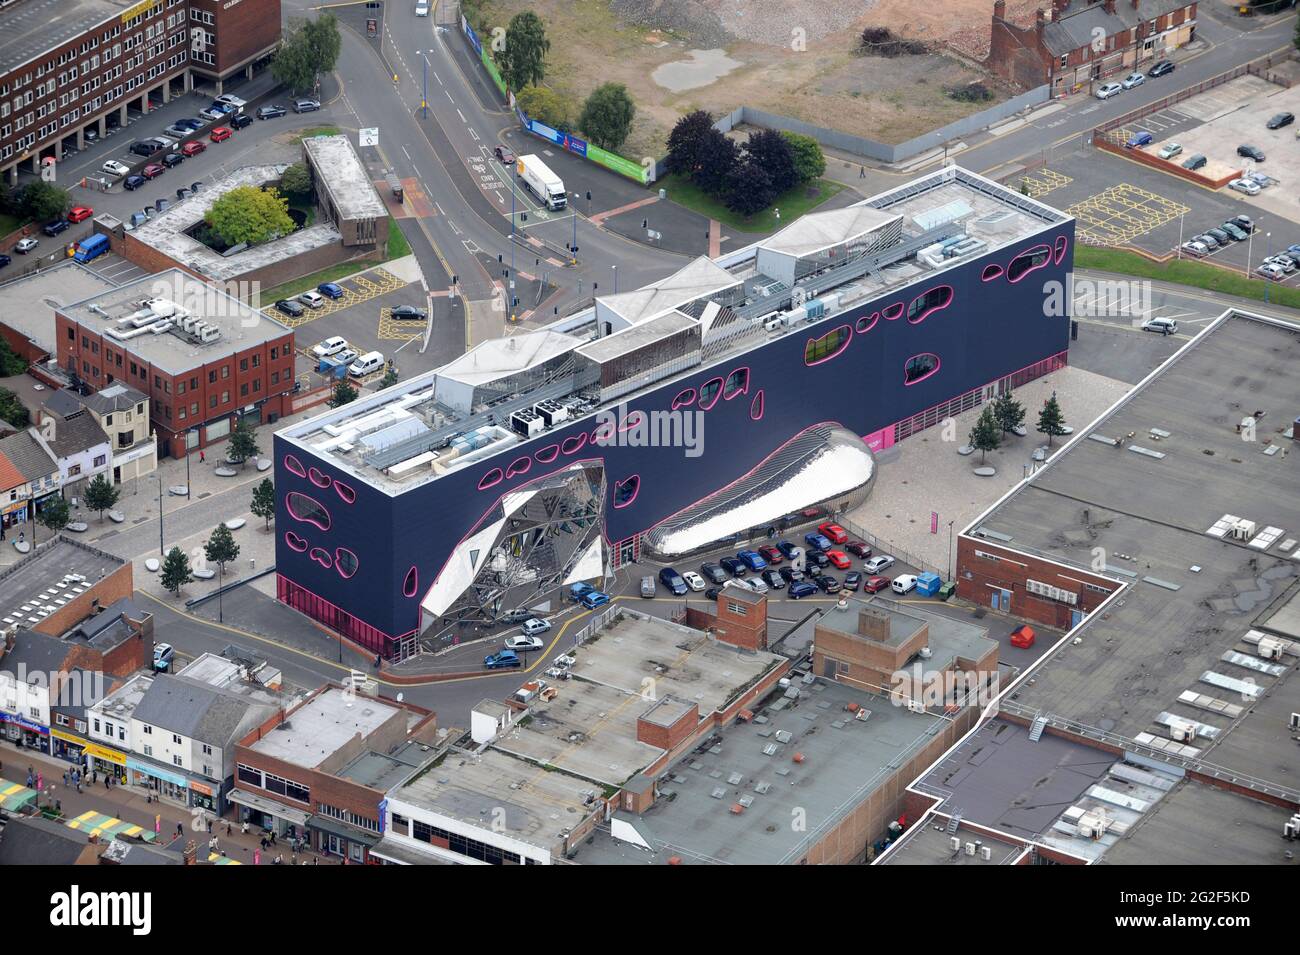 Aerial view of The Public building in West Bromwich Sandwell Uk Stock Photo